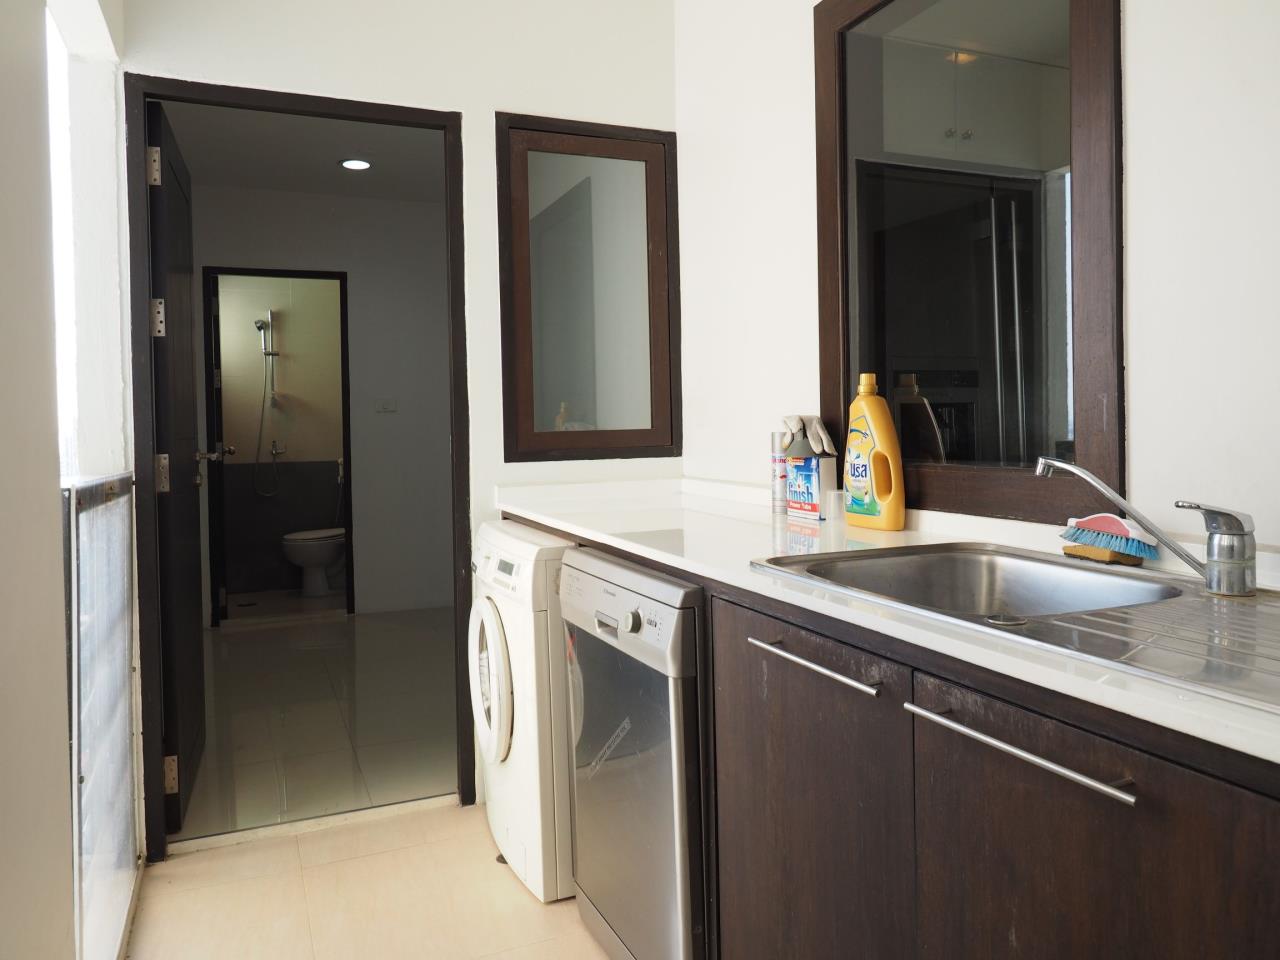 3 Bedrooms 3 Bathrooms Size 200.12 at Sathorn Gardens for Rent